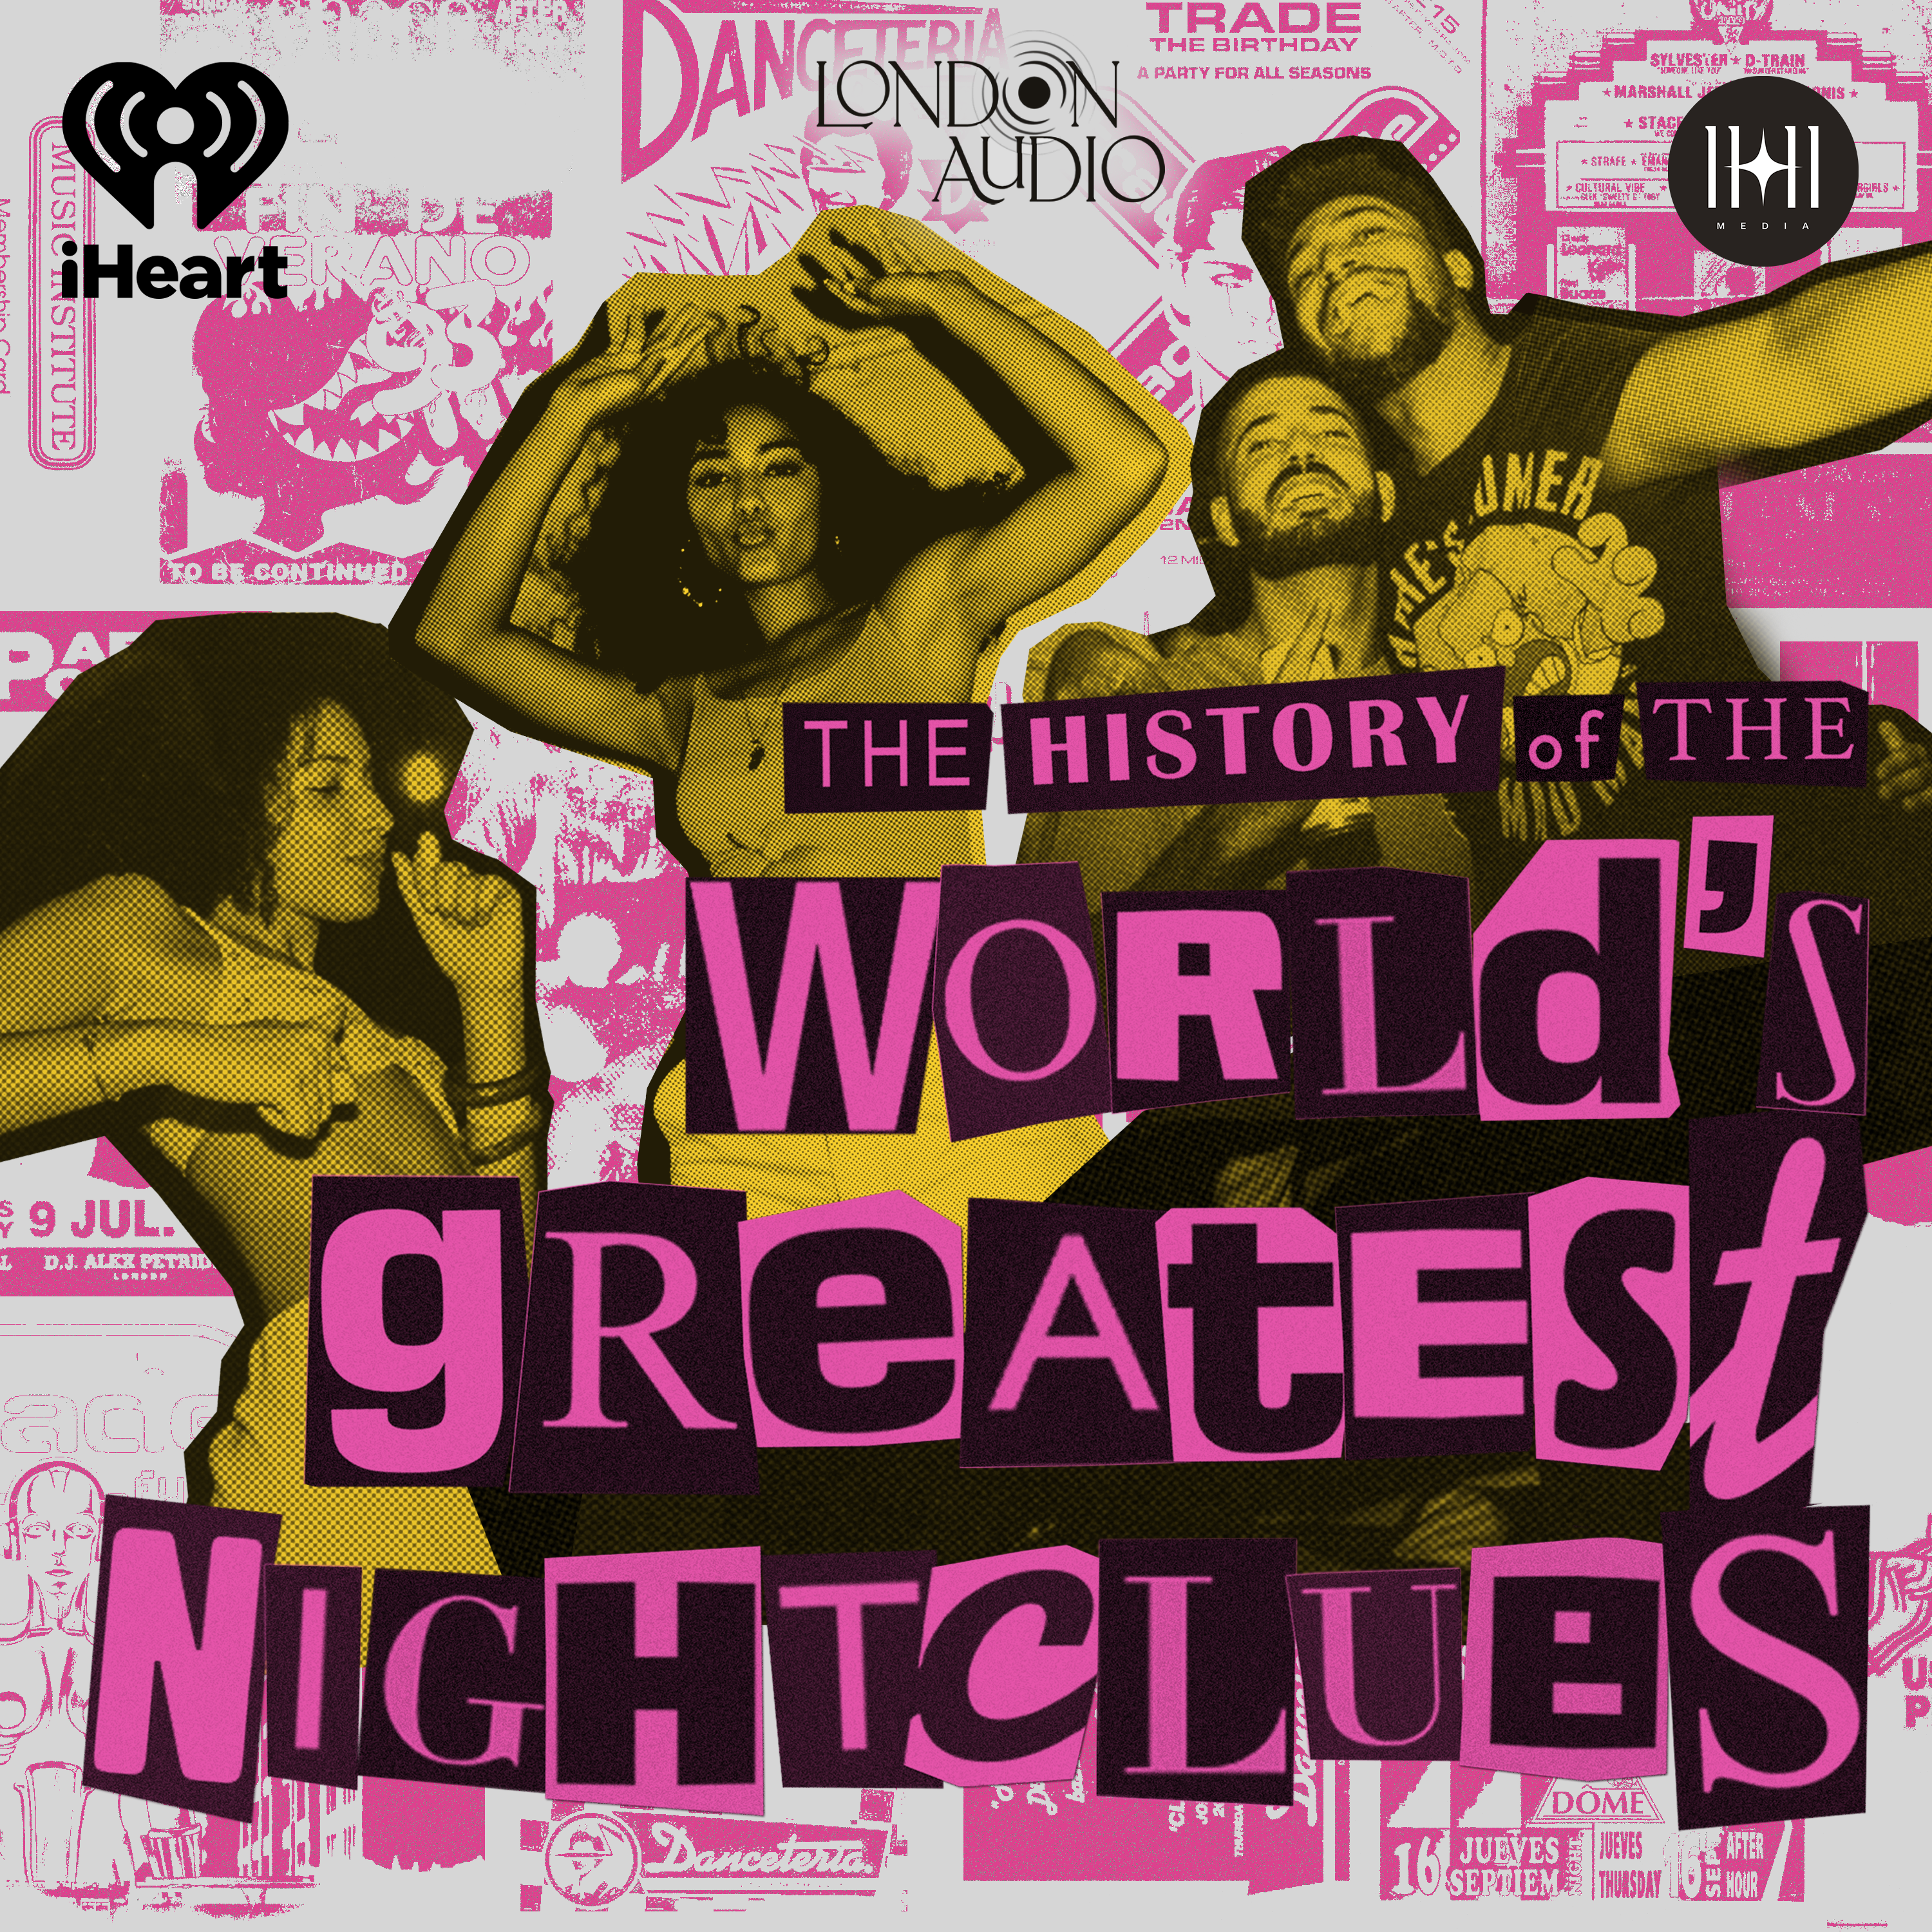 Introducing: The History of the World’s Greatest Nightclubs